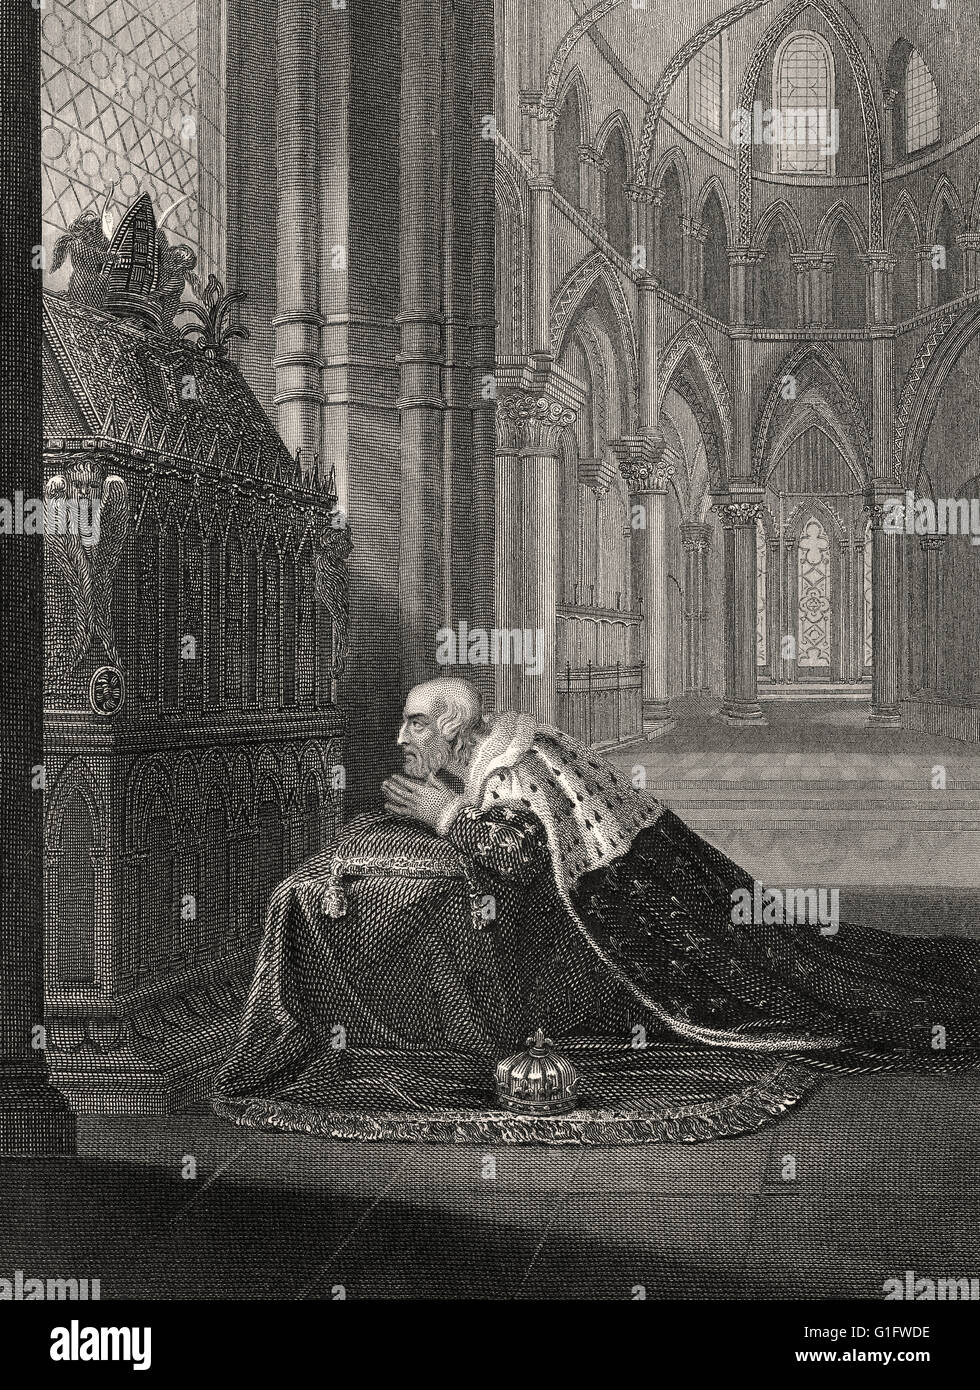 Louis VII, King of France, before the Tomb of Thomas Becket, archbishop of Canterbury, Canterbury Cathedral Stock Photo